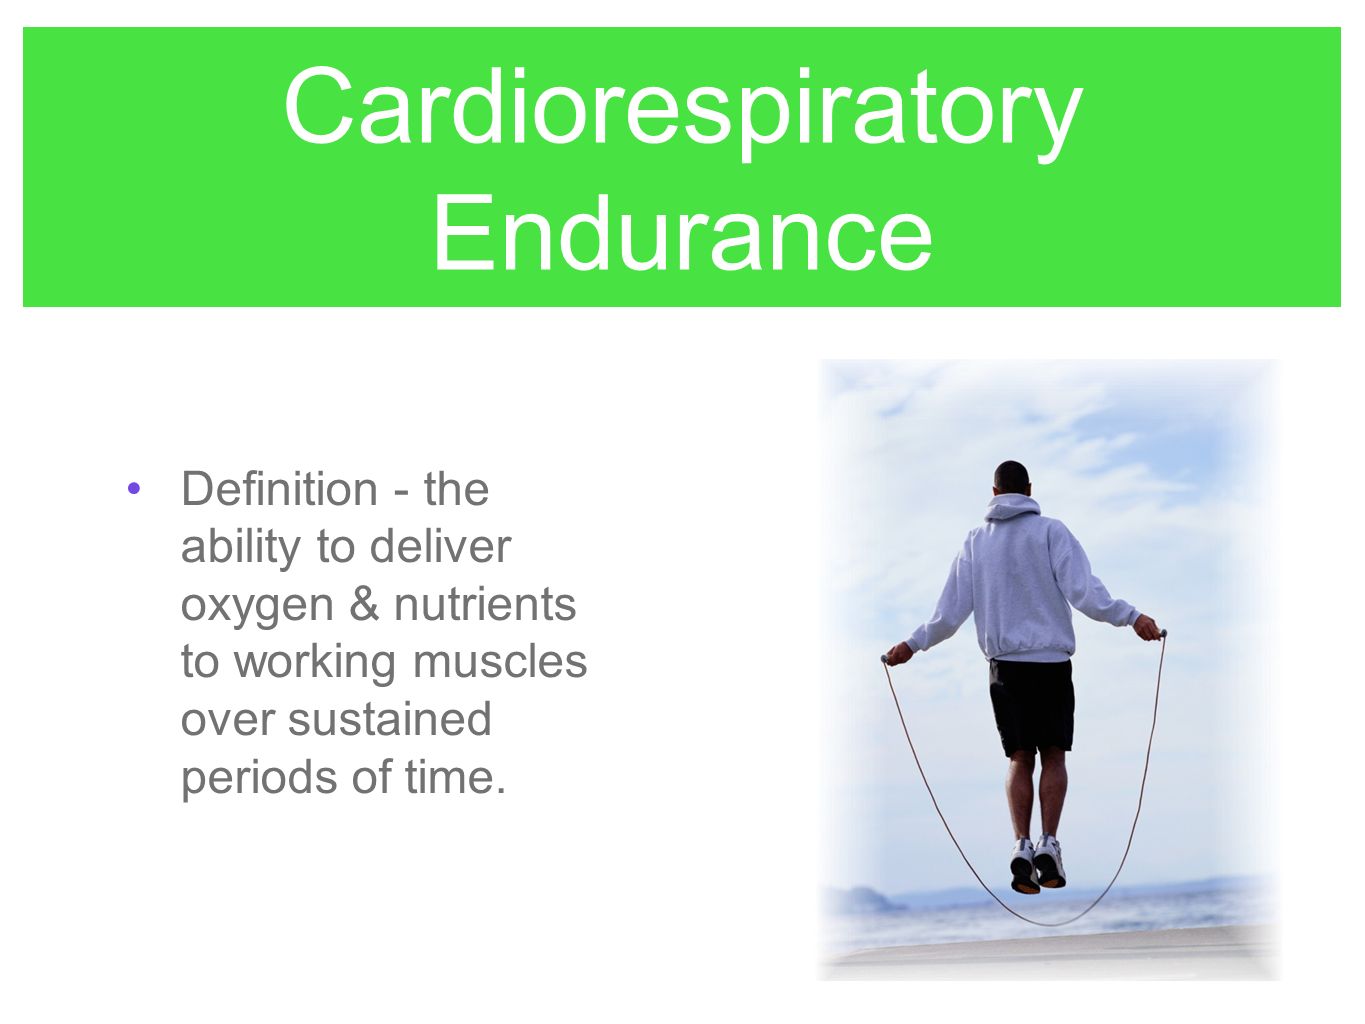 5 Components Health Related Physical Fitness. Components of Physical Fitness 1. Cardiorespiratory Endurance 2. Muscular Endurance Muscular Strength. - ppt download